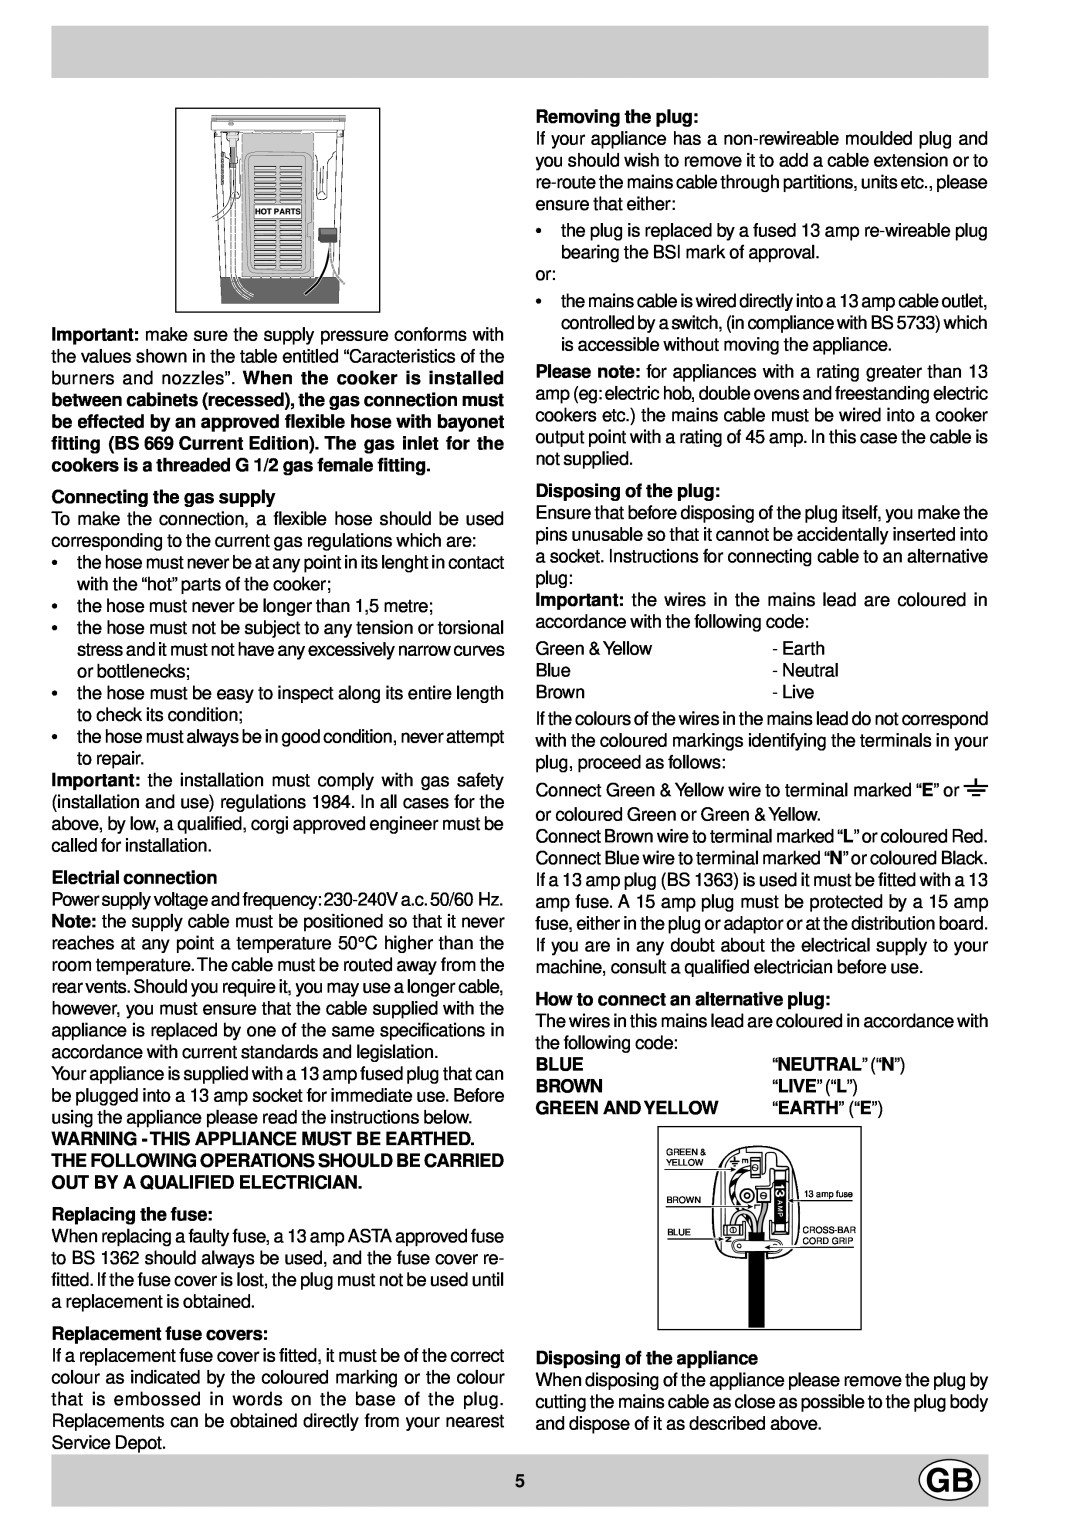 Ariston K3G2/G, K3G21/G manual Connecting the gas supply 